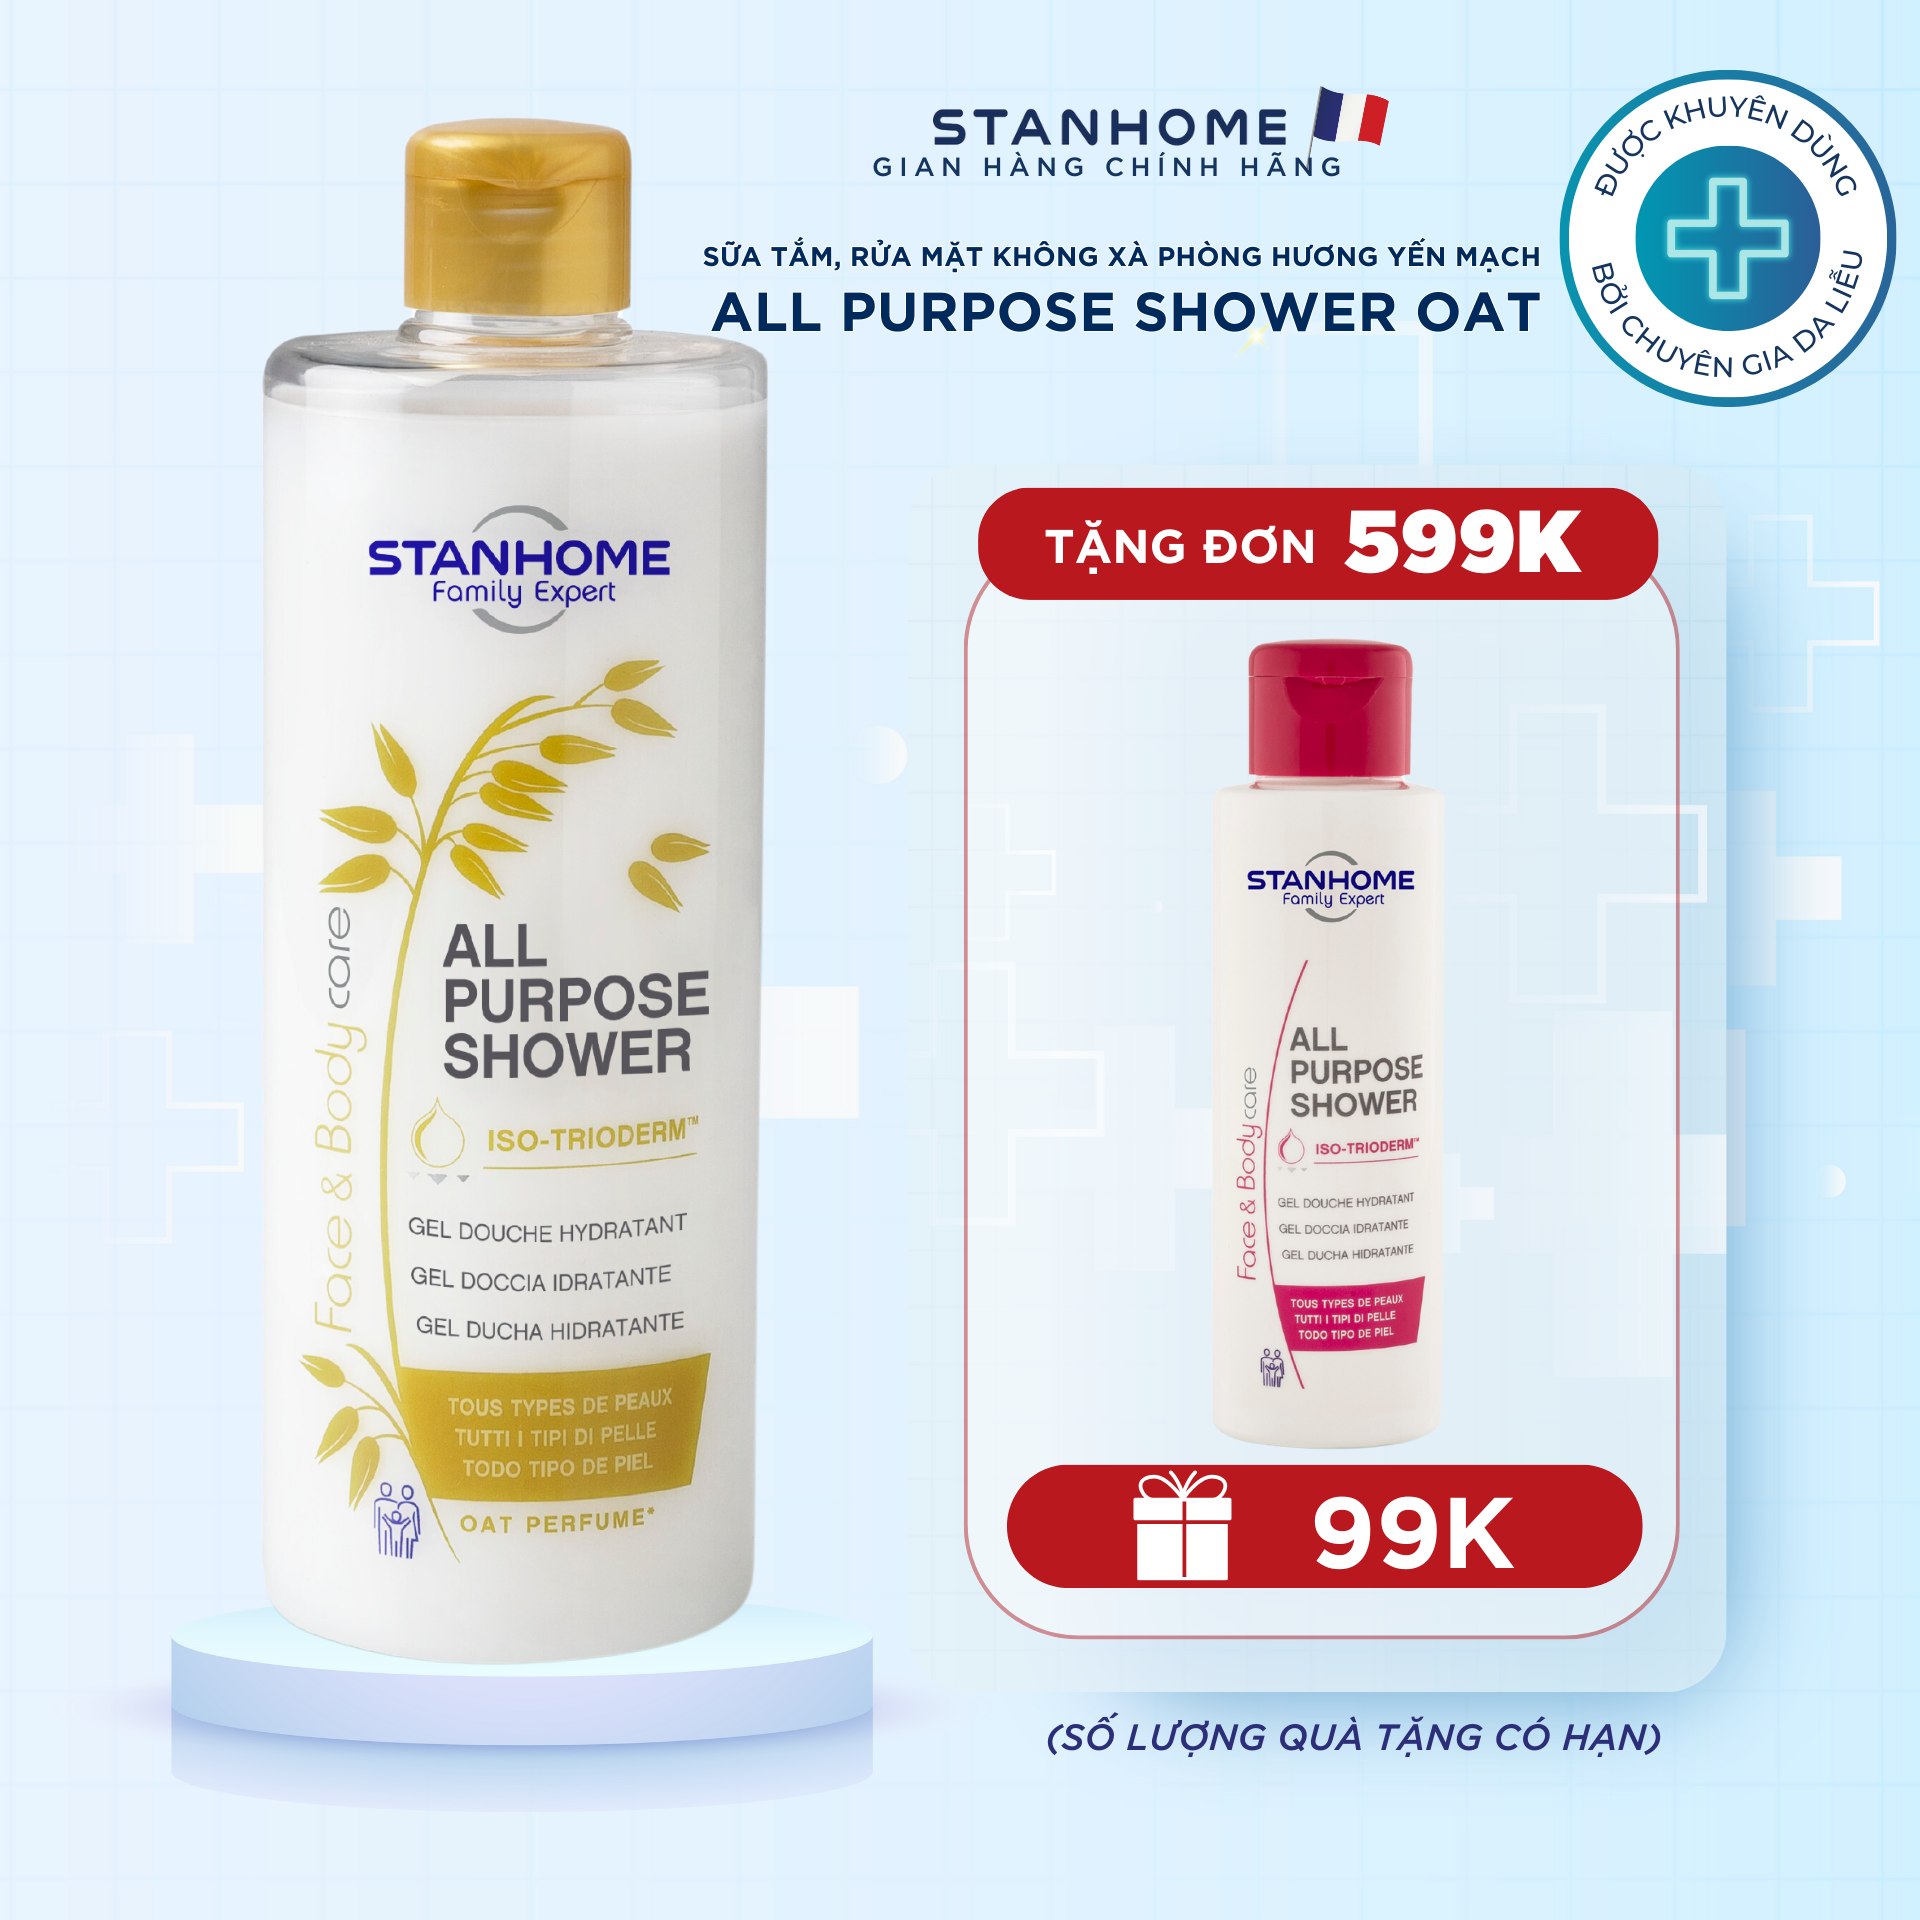 Stanhome all purpose shower gel 2 in 1 shower non soap cleanser suitable